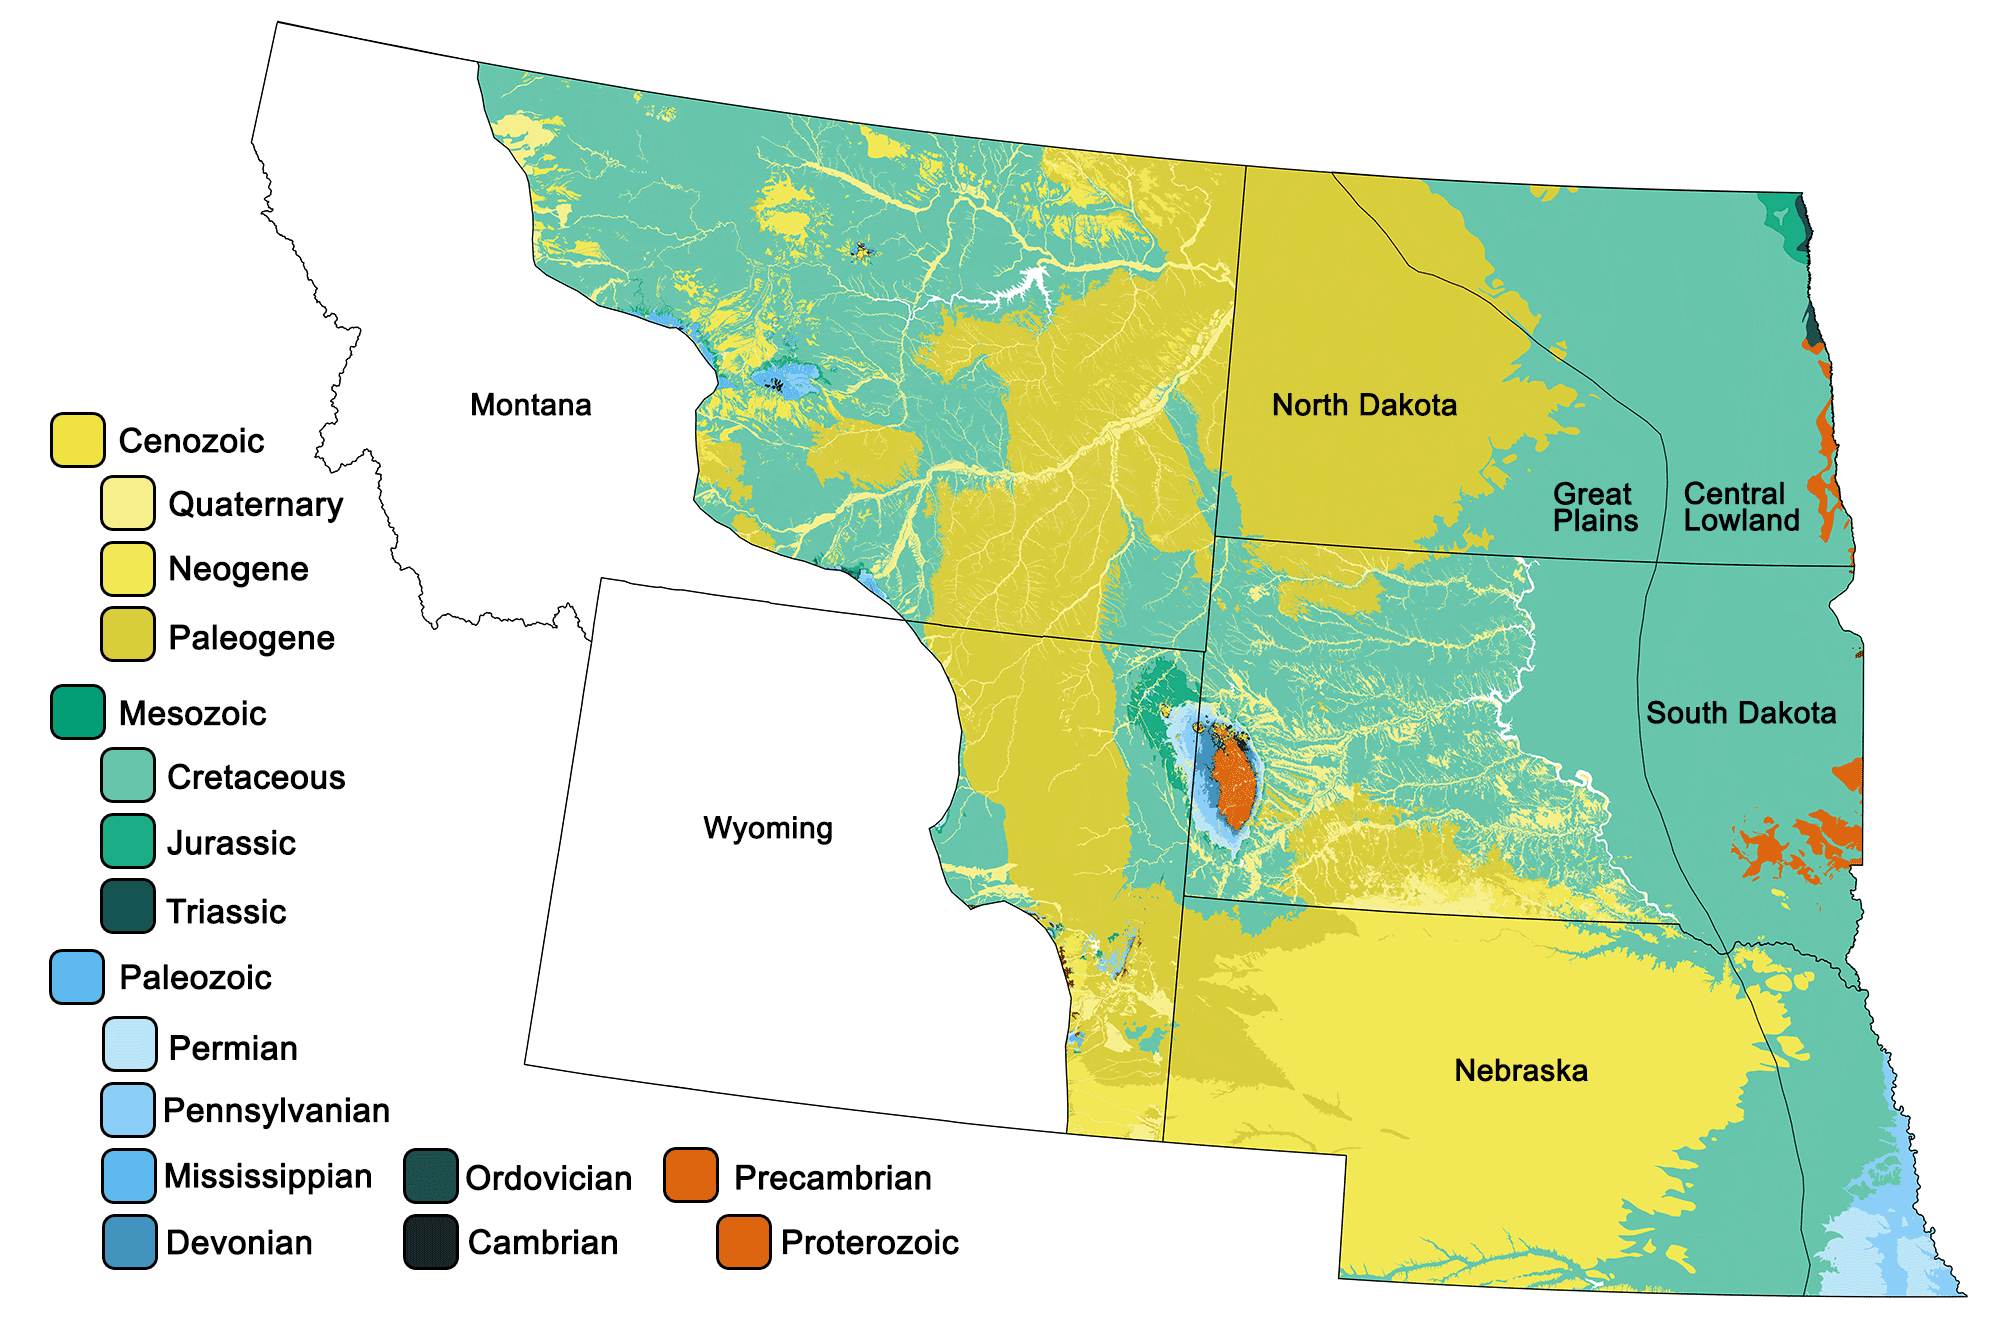 Geologic map of the Great Plains and Central Lowland regions of the northwest-central United States.